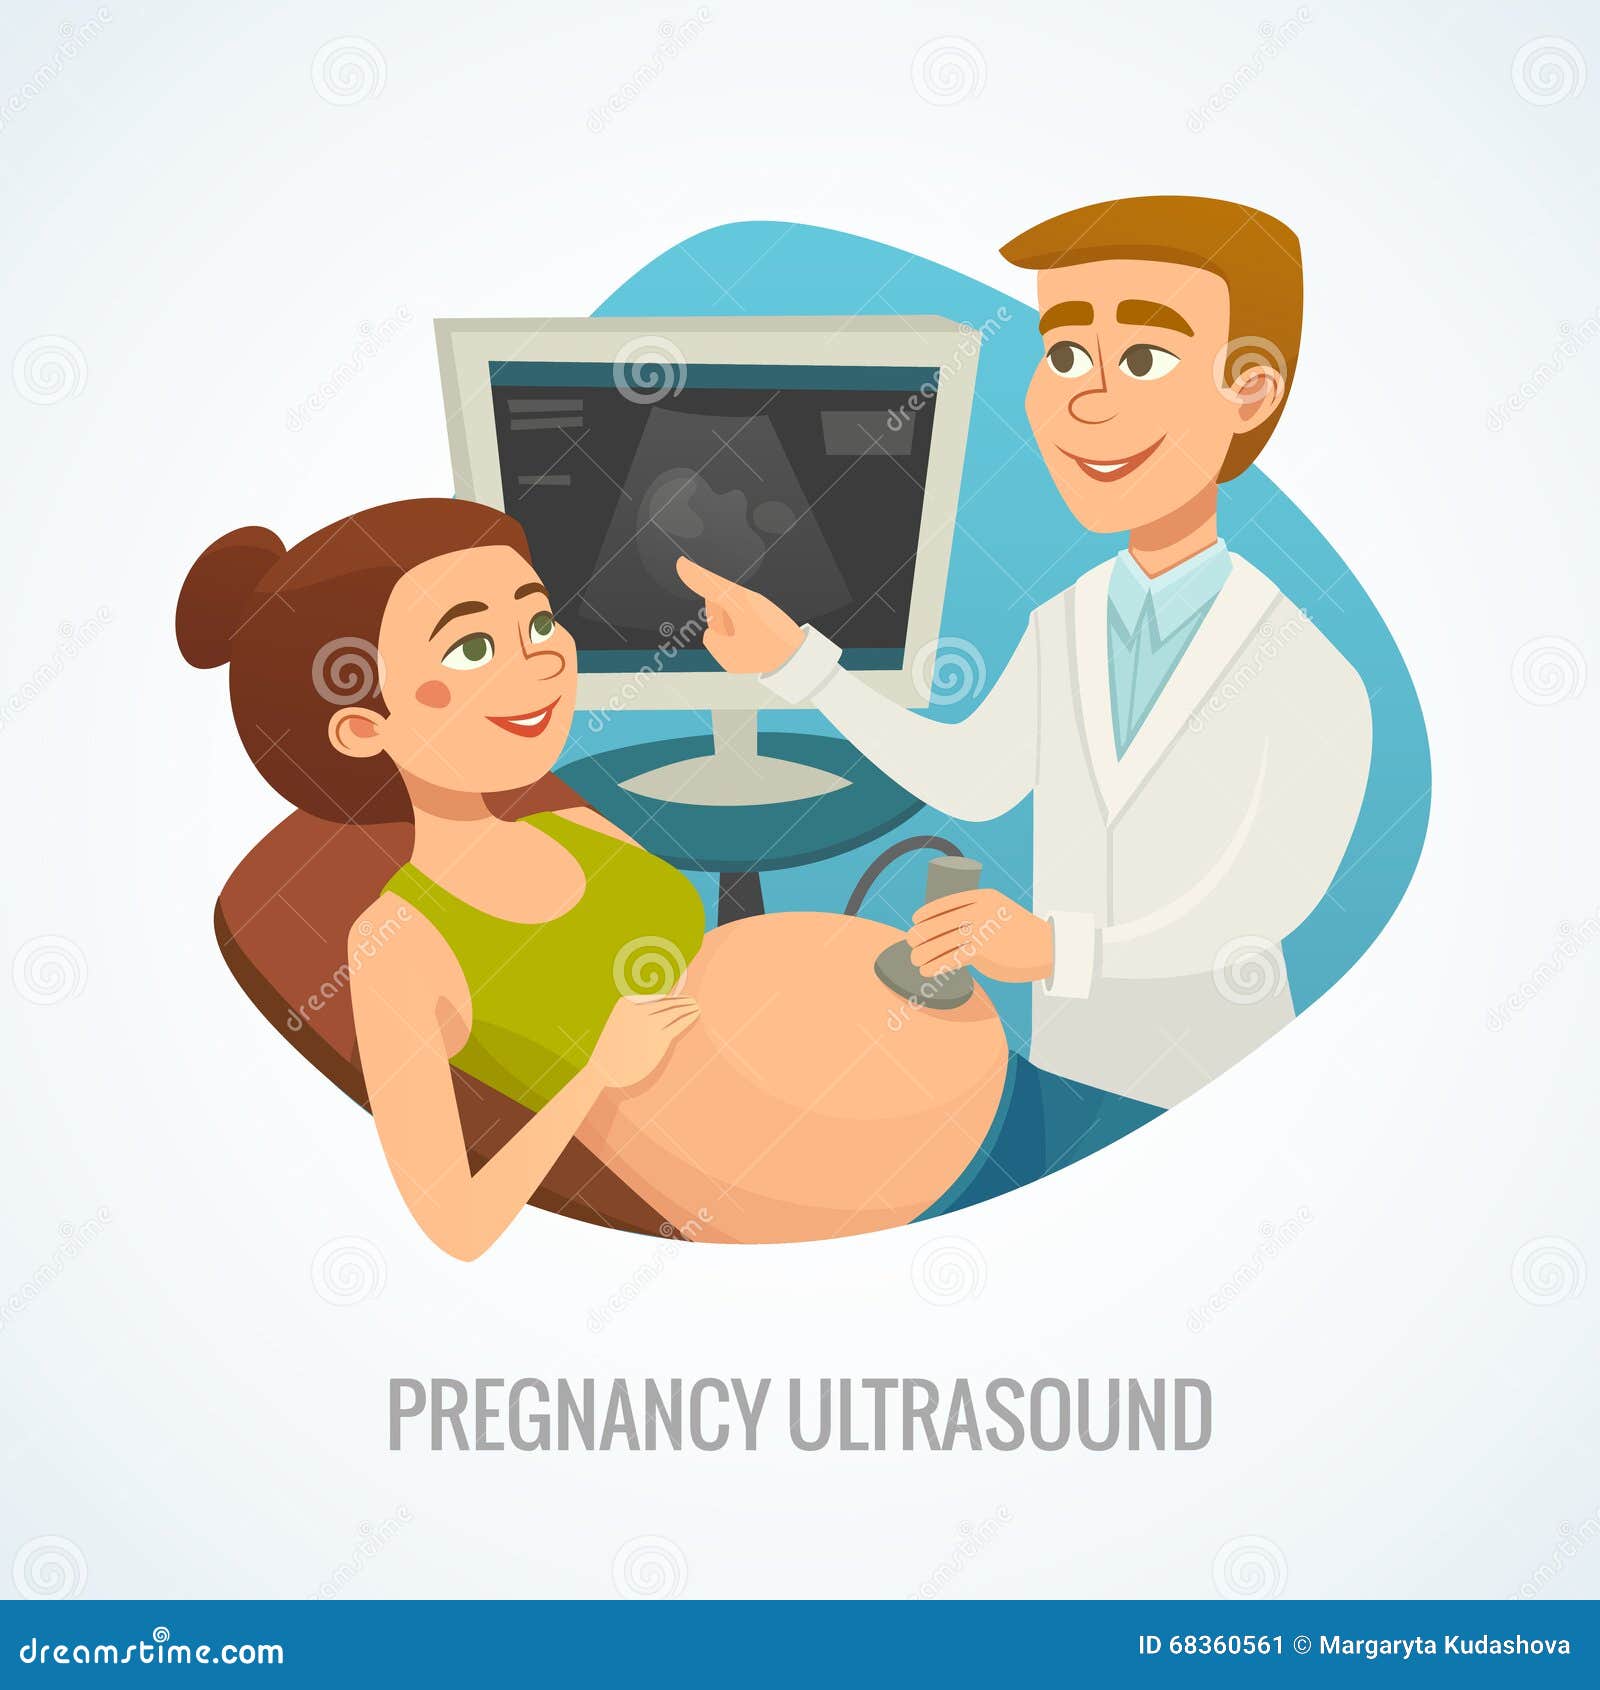 Pregnancy Ultrasound Composition Concept, Pregnant Woman with Doctor